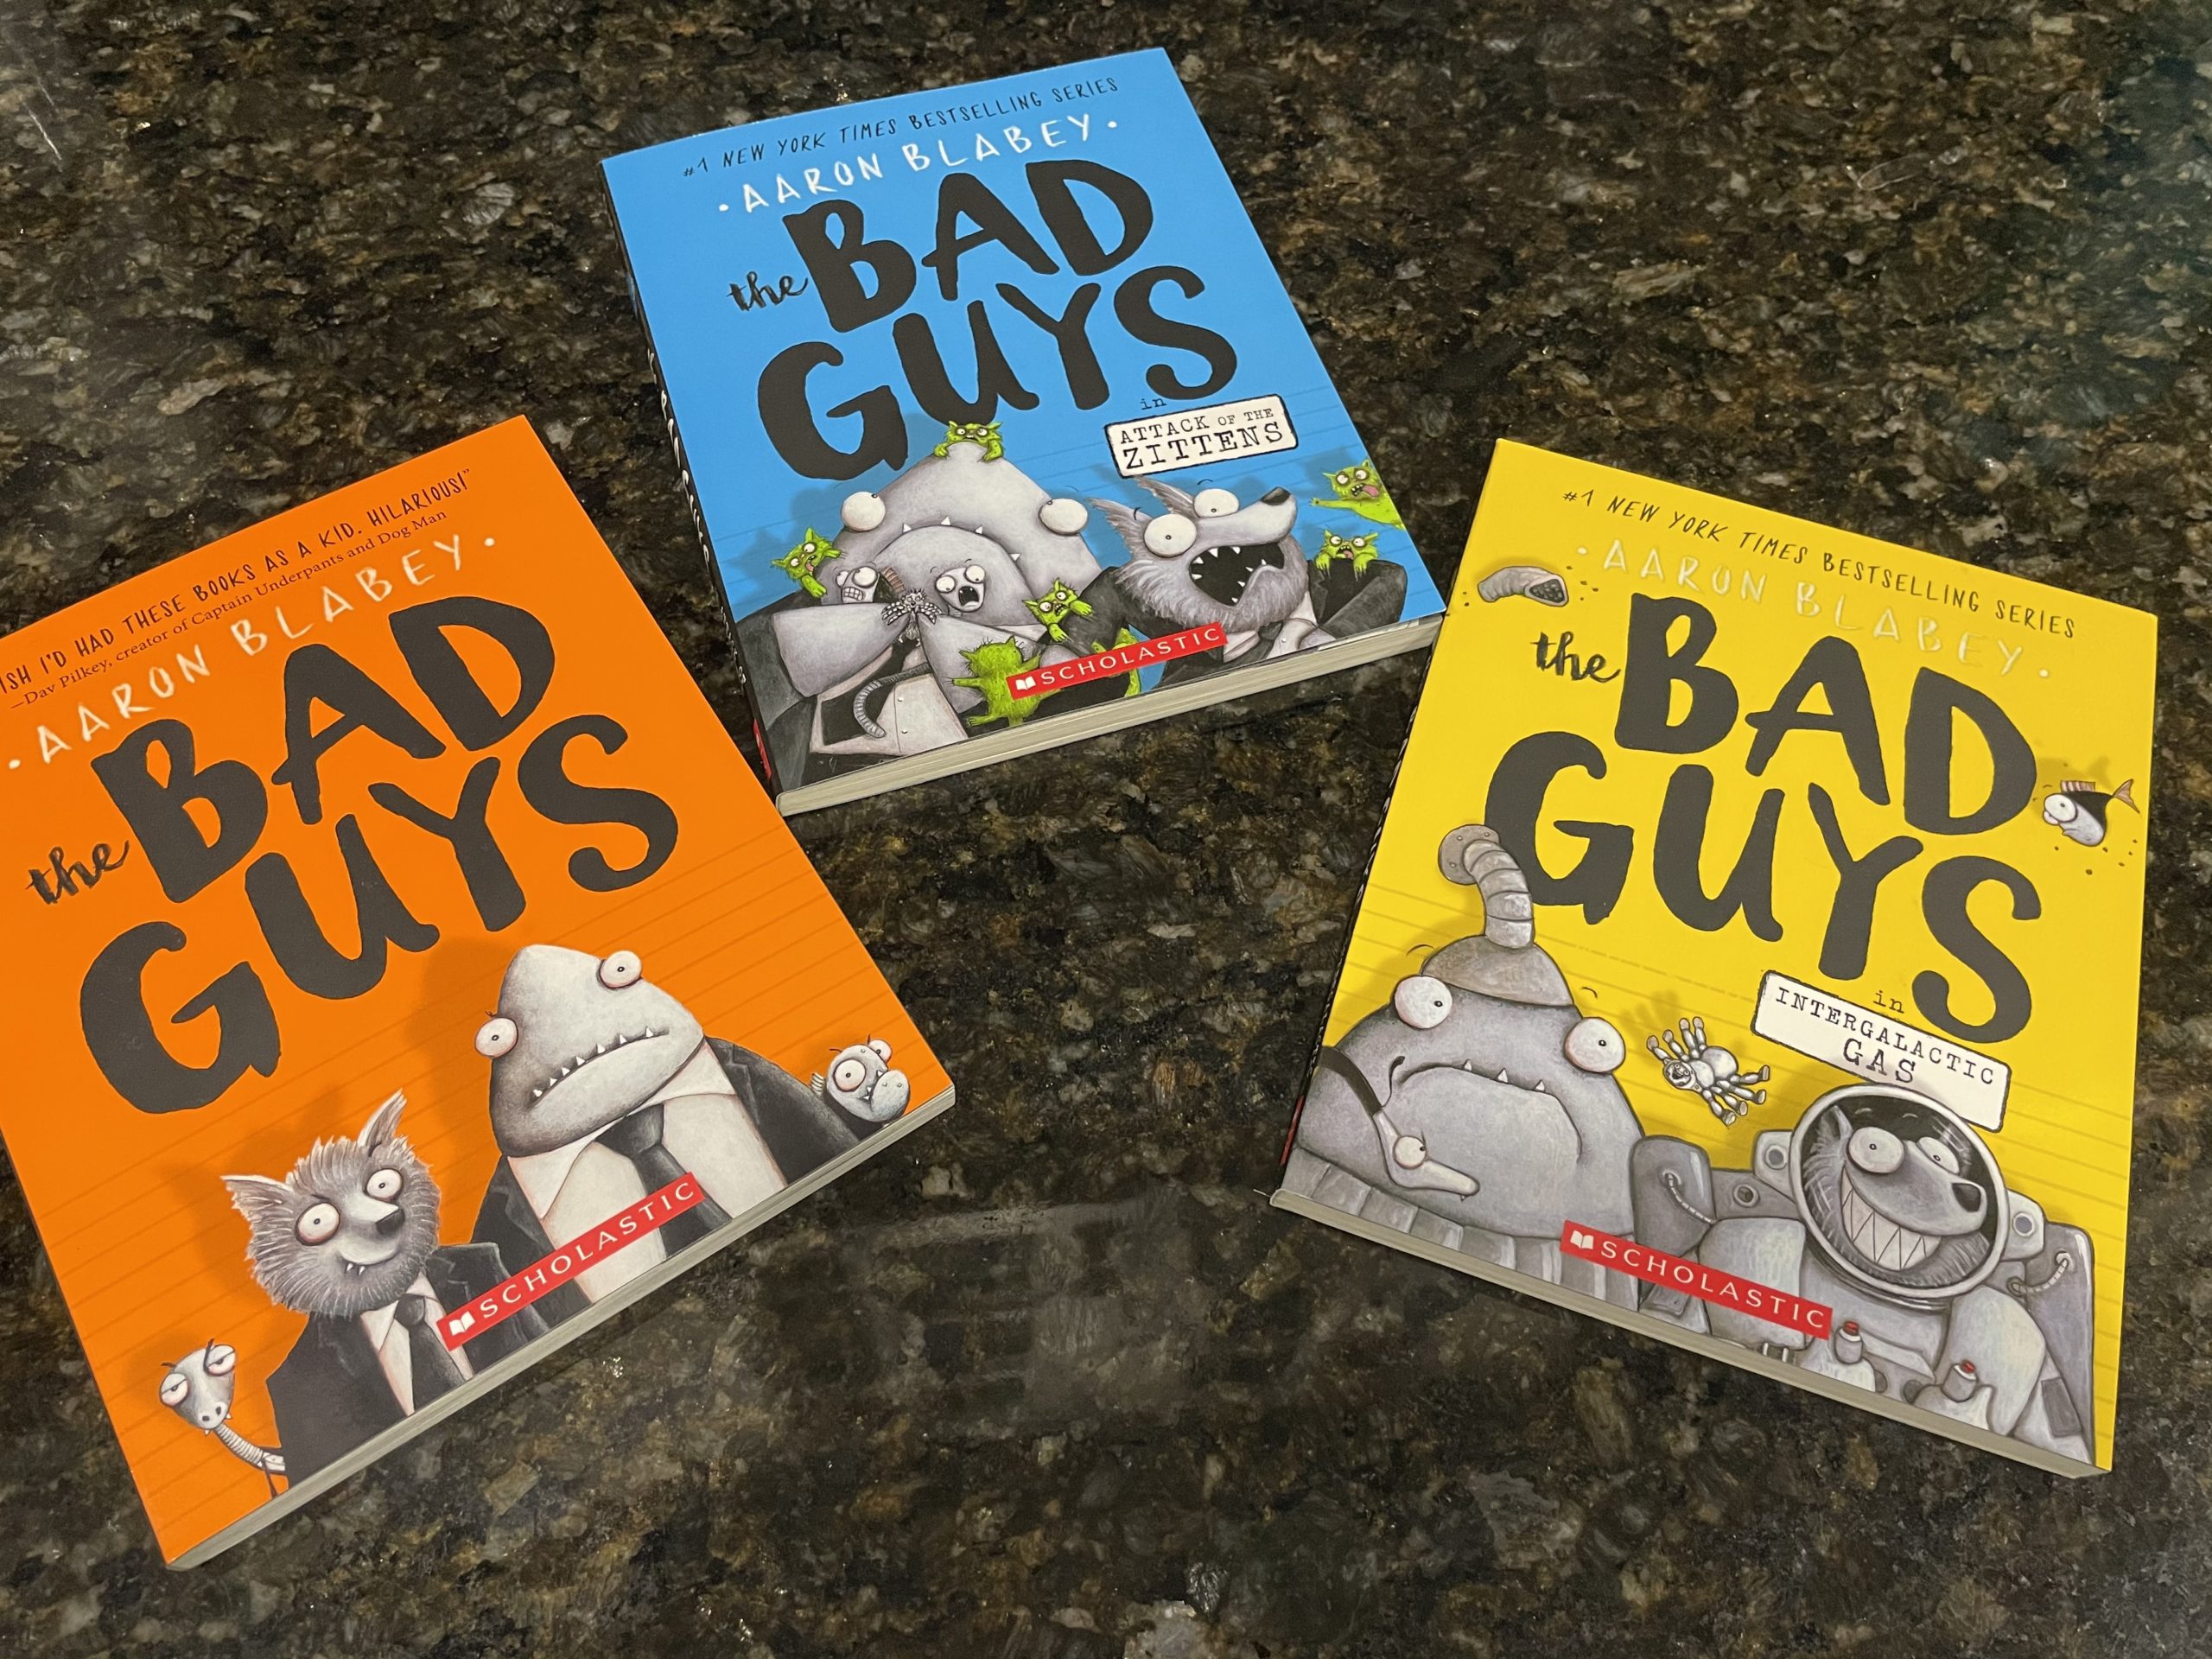 Homeschooling with The Bad Guys books